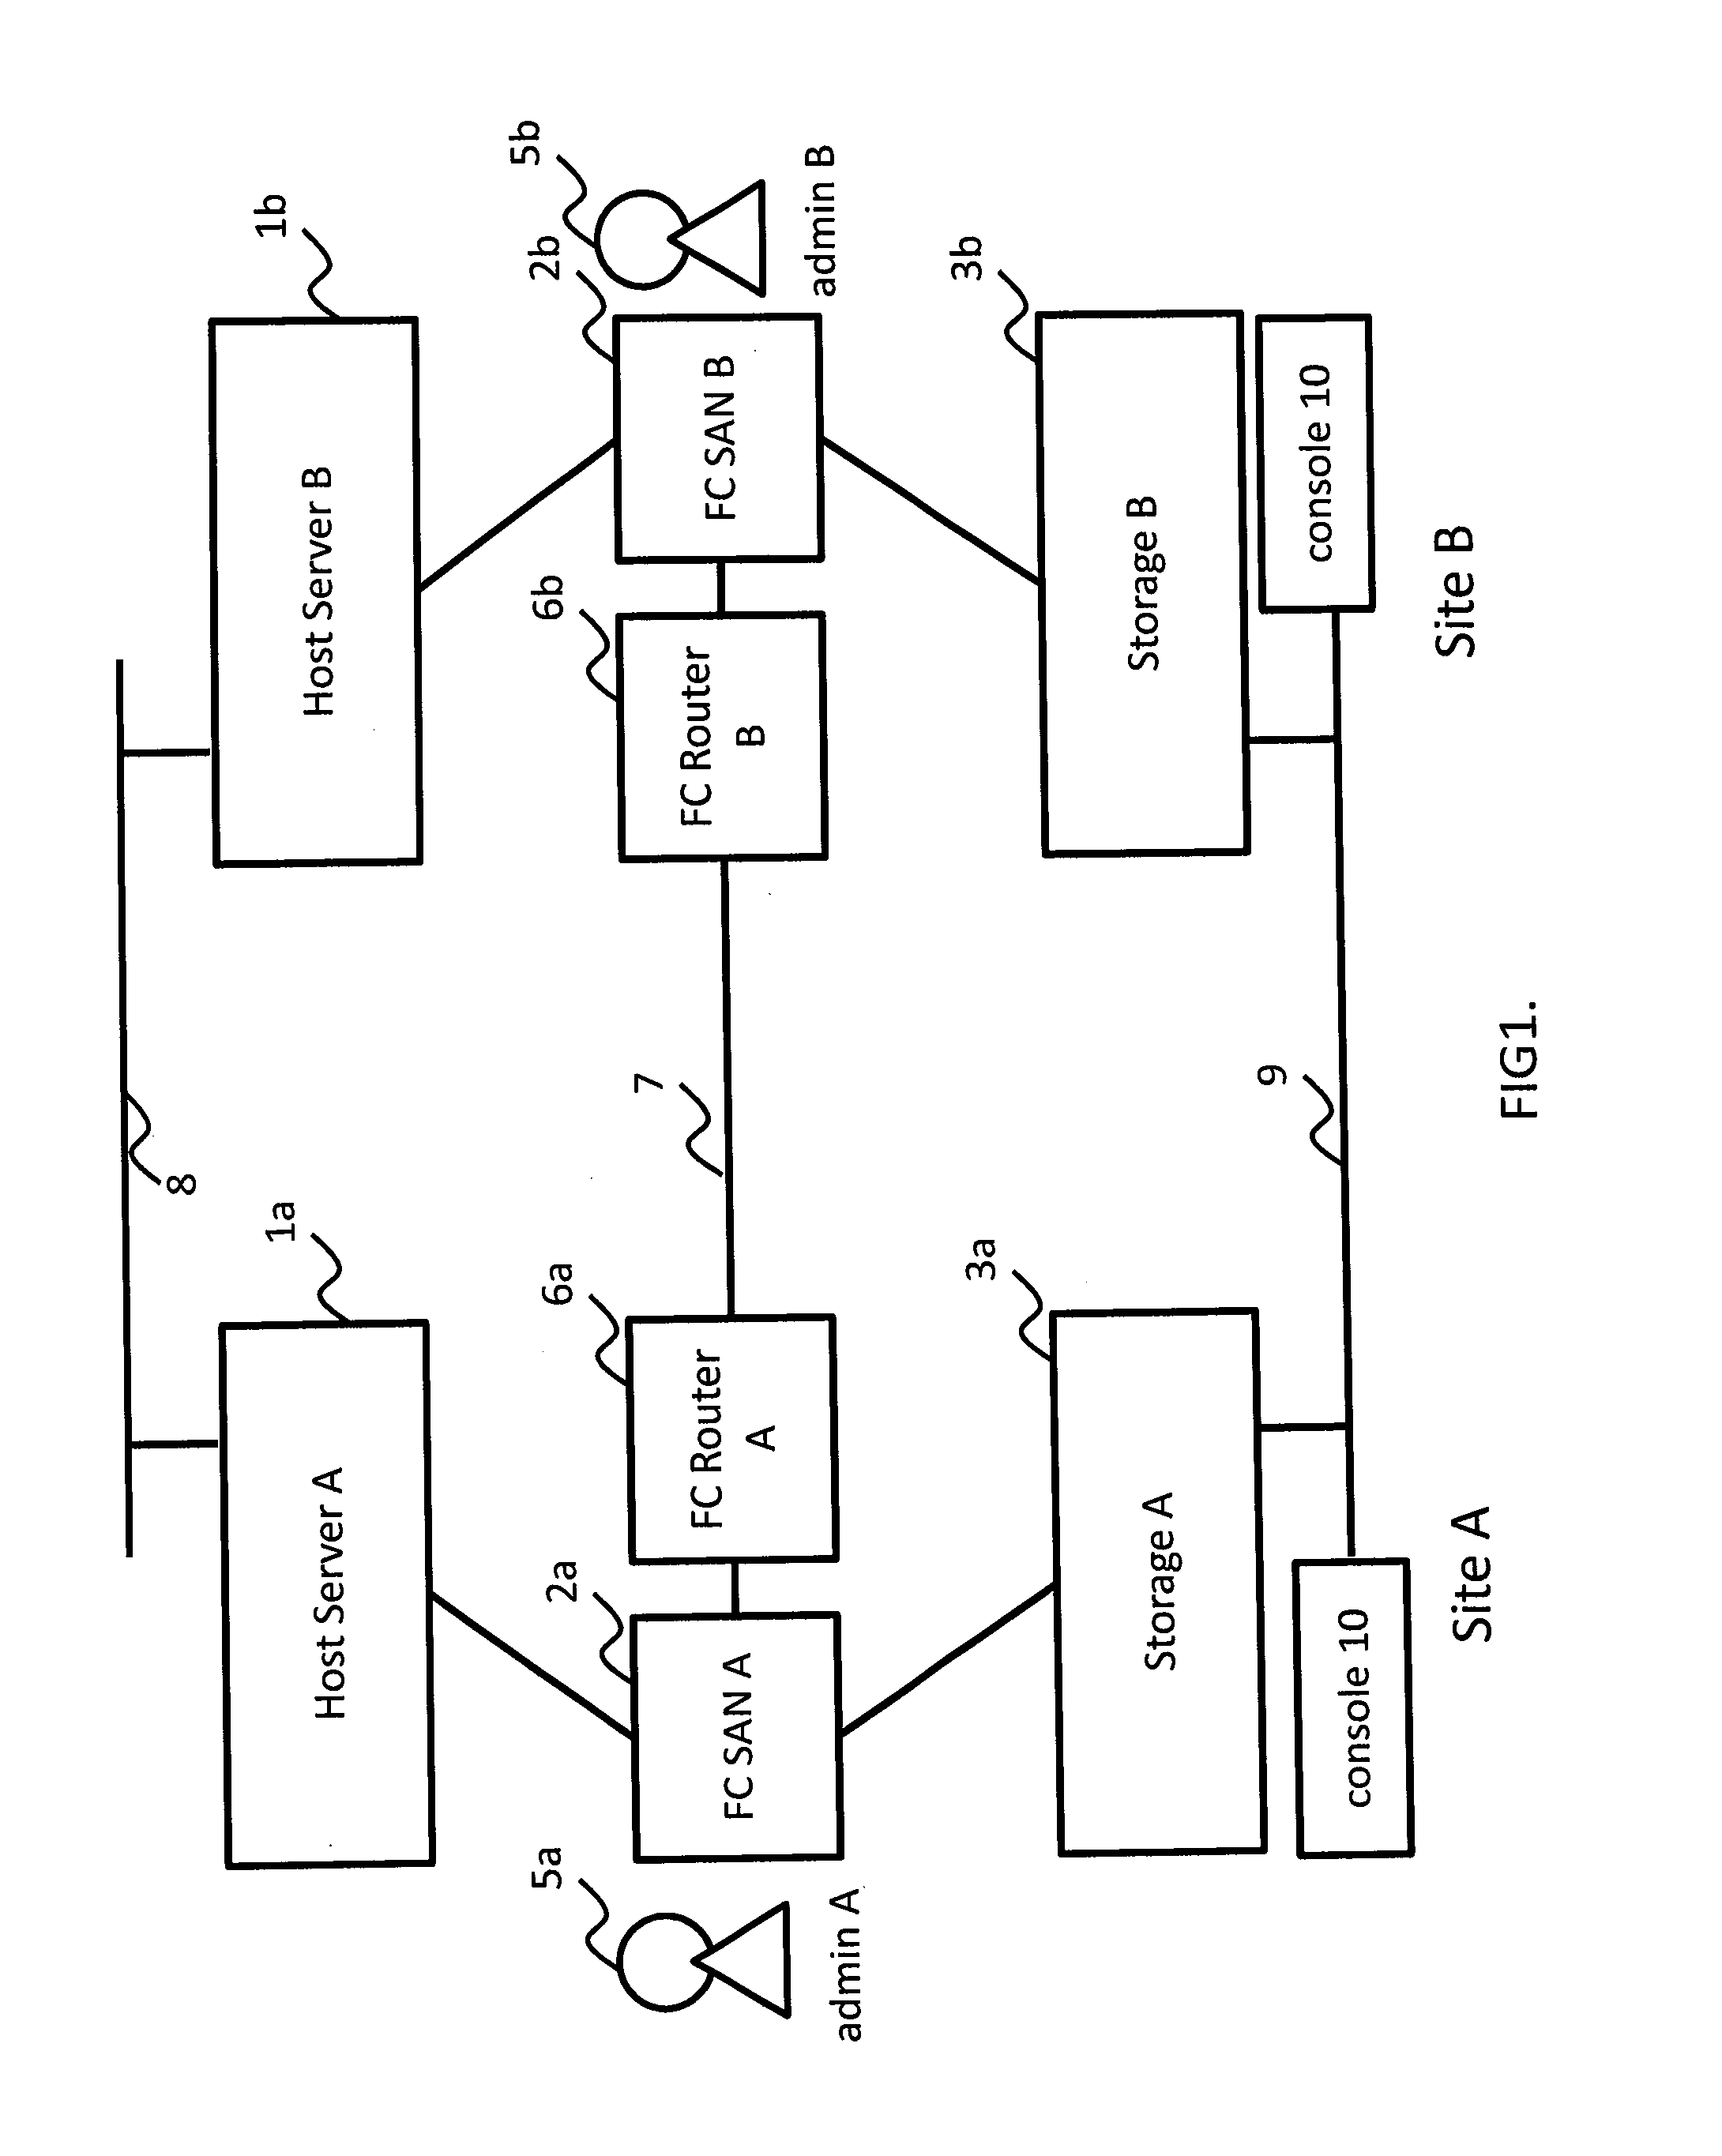 Method and apparatus of network configuration for storage federation